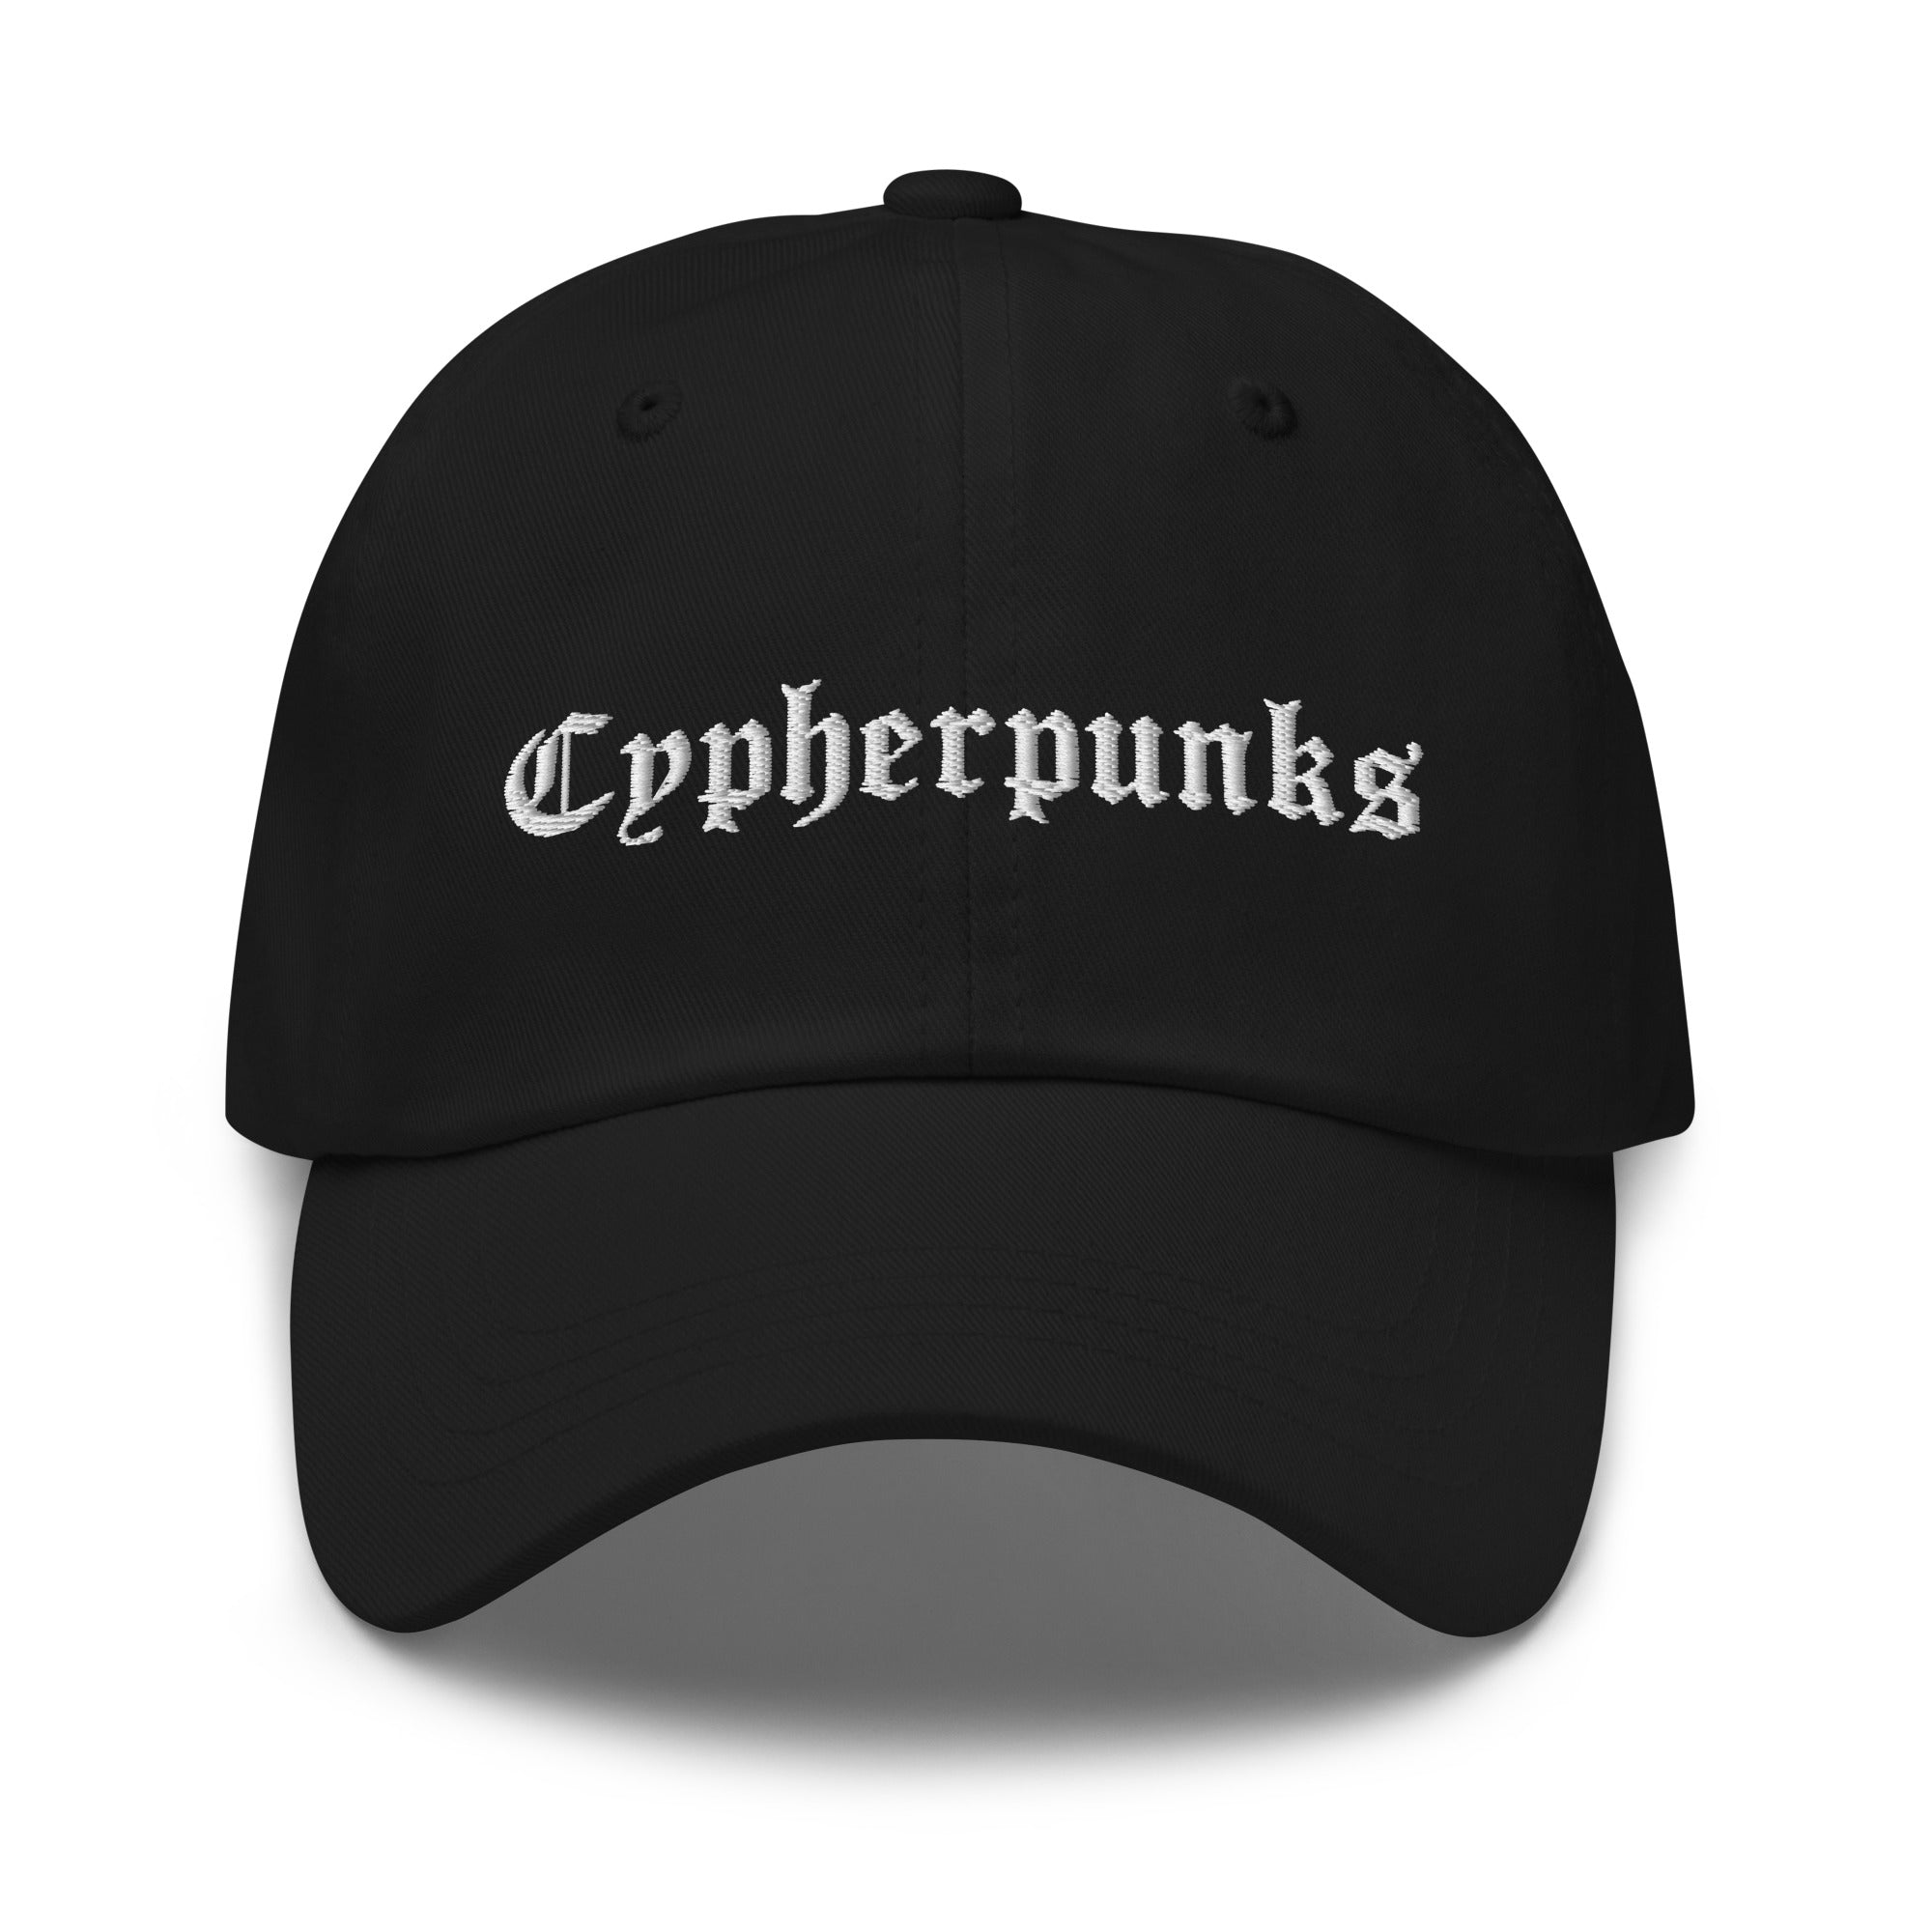 Crypto Hat - The Cypherpunks Hat features a Gothic script design on a black cap. Front view.